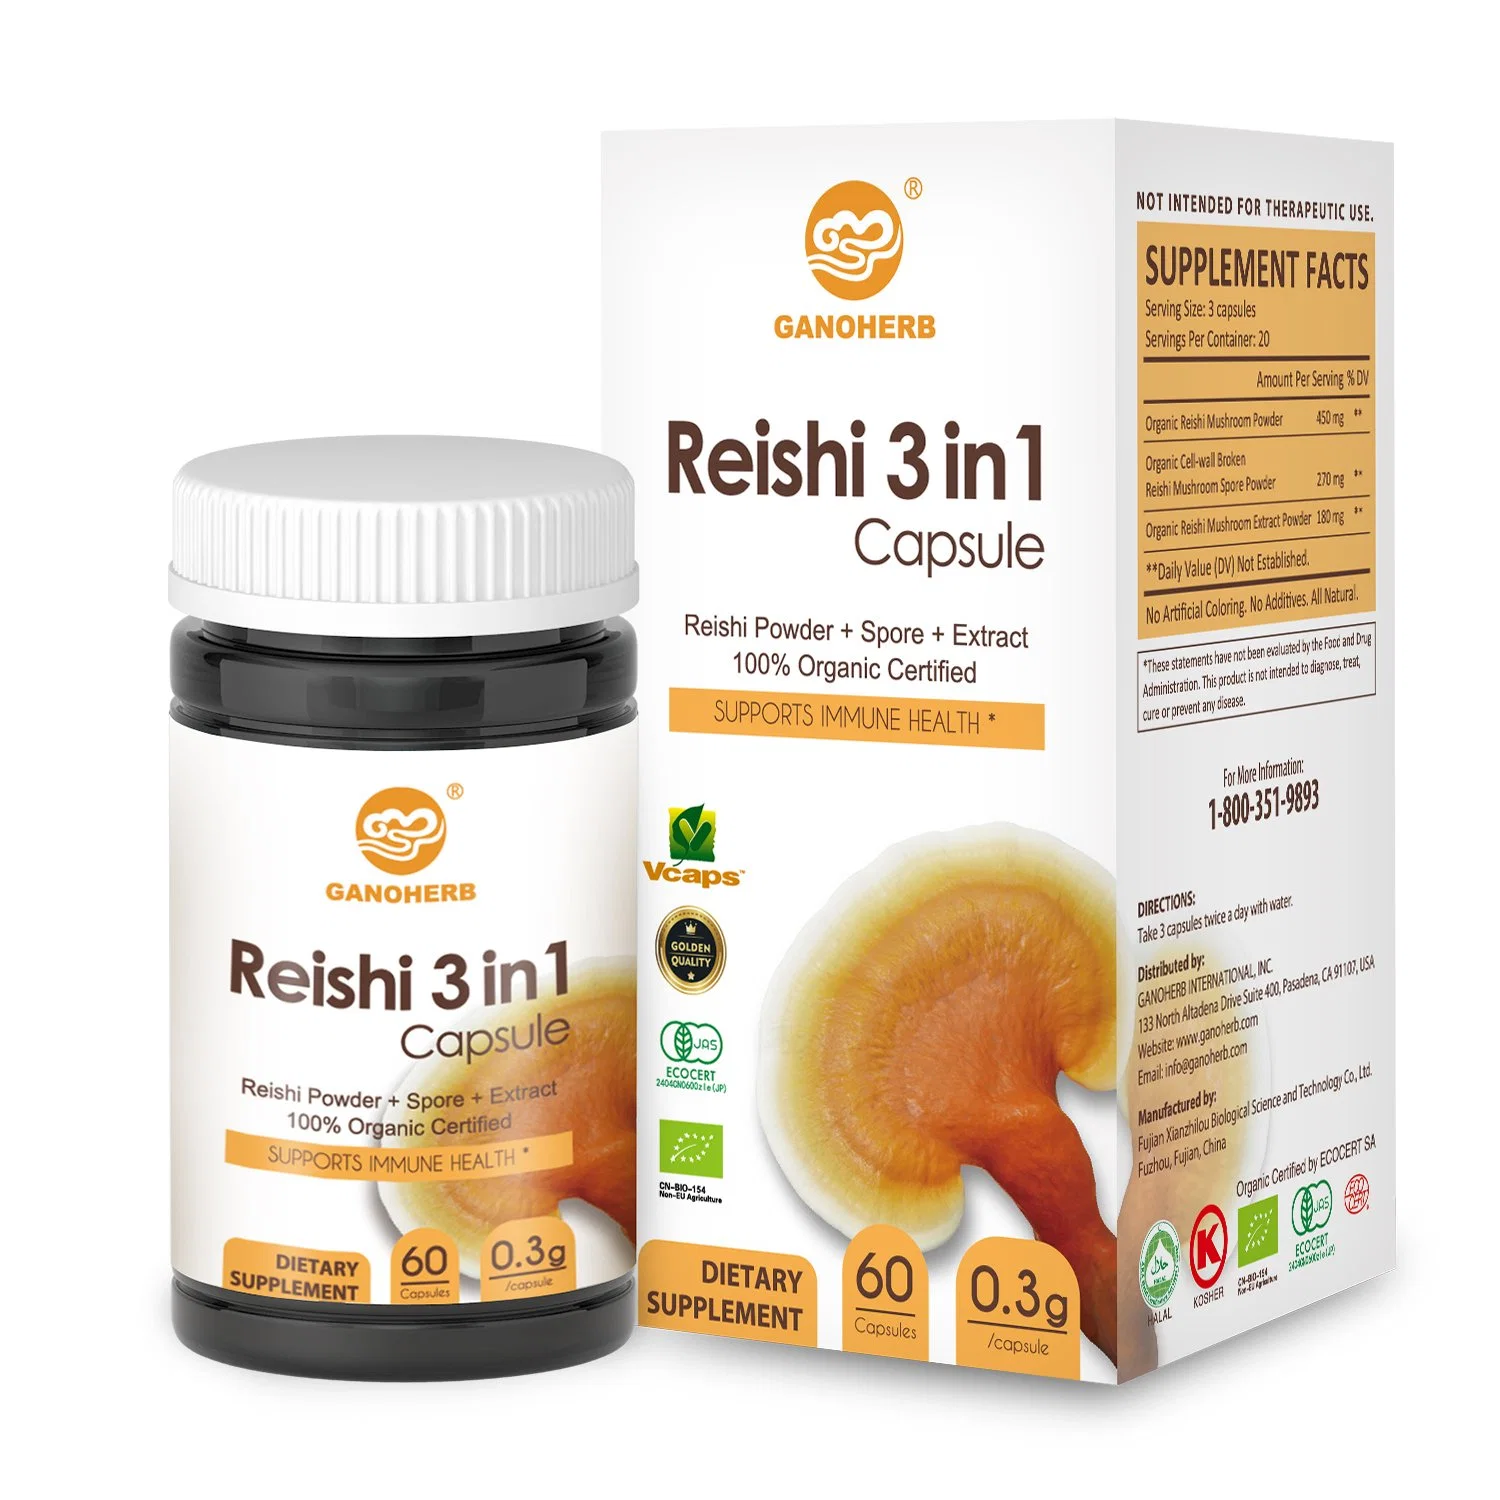 Reishi Mushroom Extract for Immune-Boosting Used in Daily Dietary Supplement